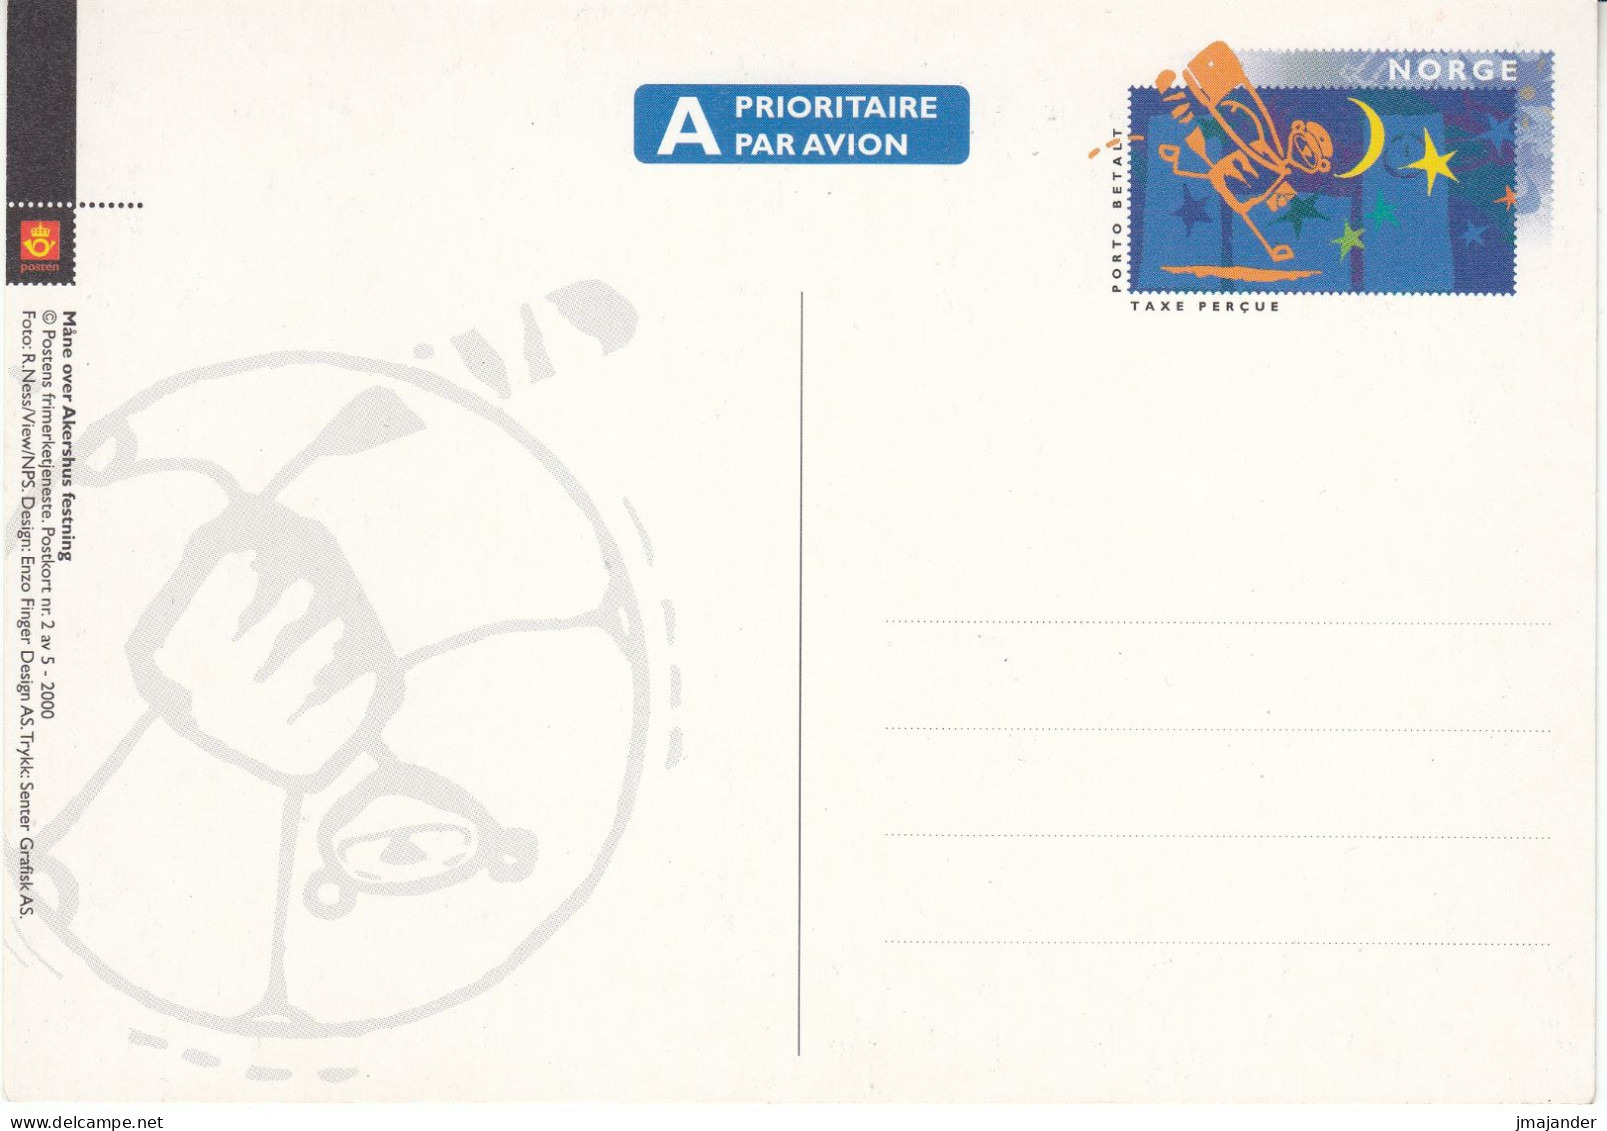 Norway 2000 - 100 Years Of Oslo: Akershus Fortress - Postal Stationery Card ** MNH - Entiers Postaux